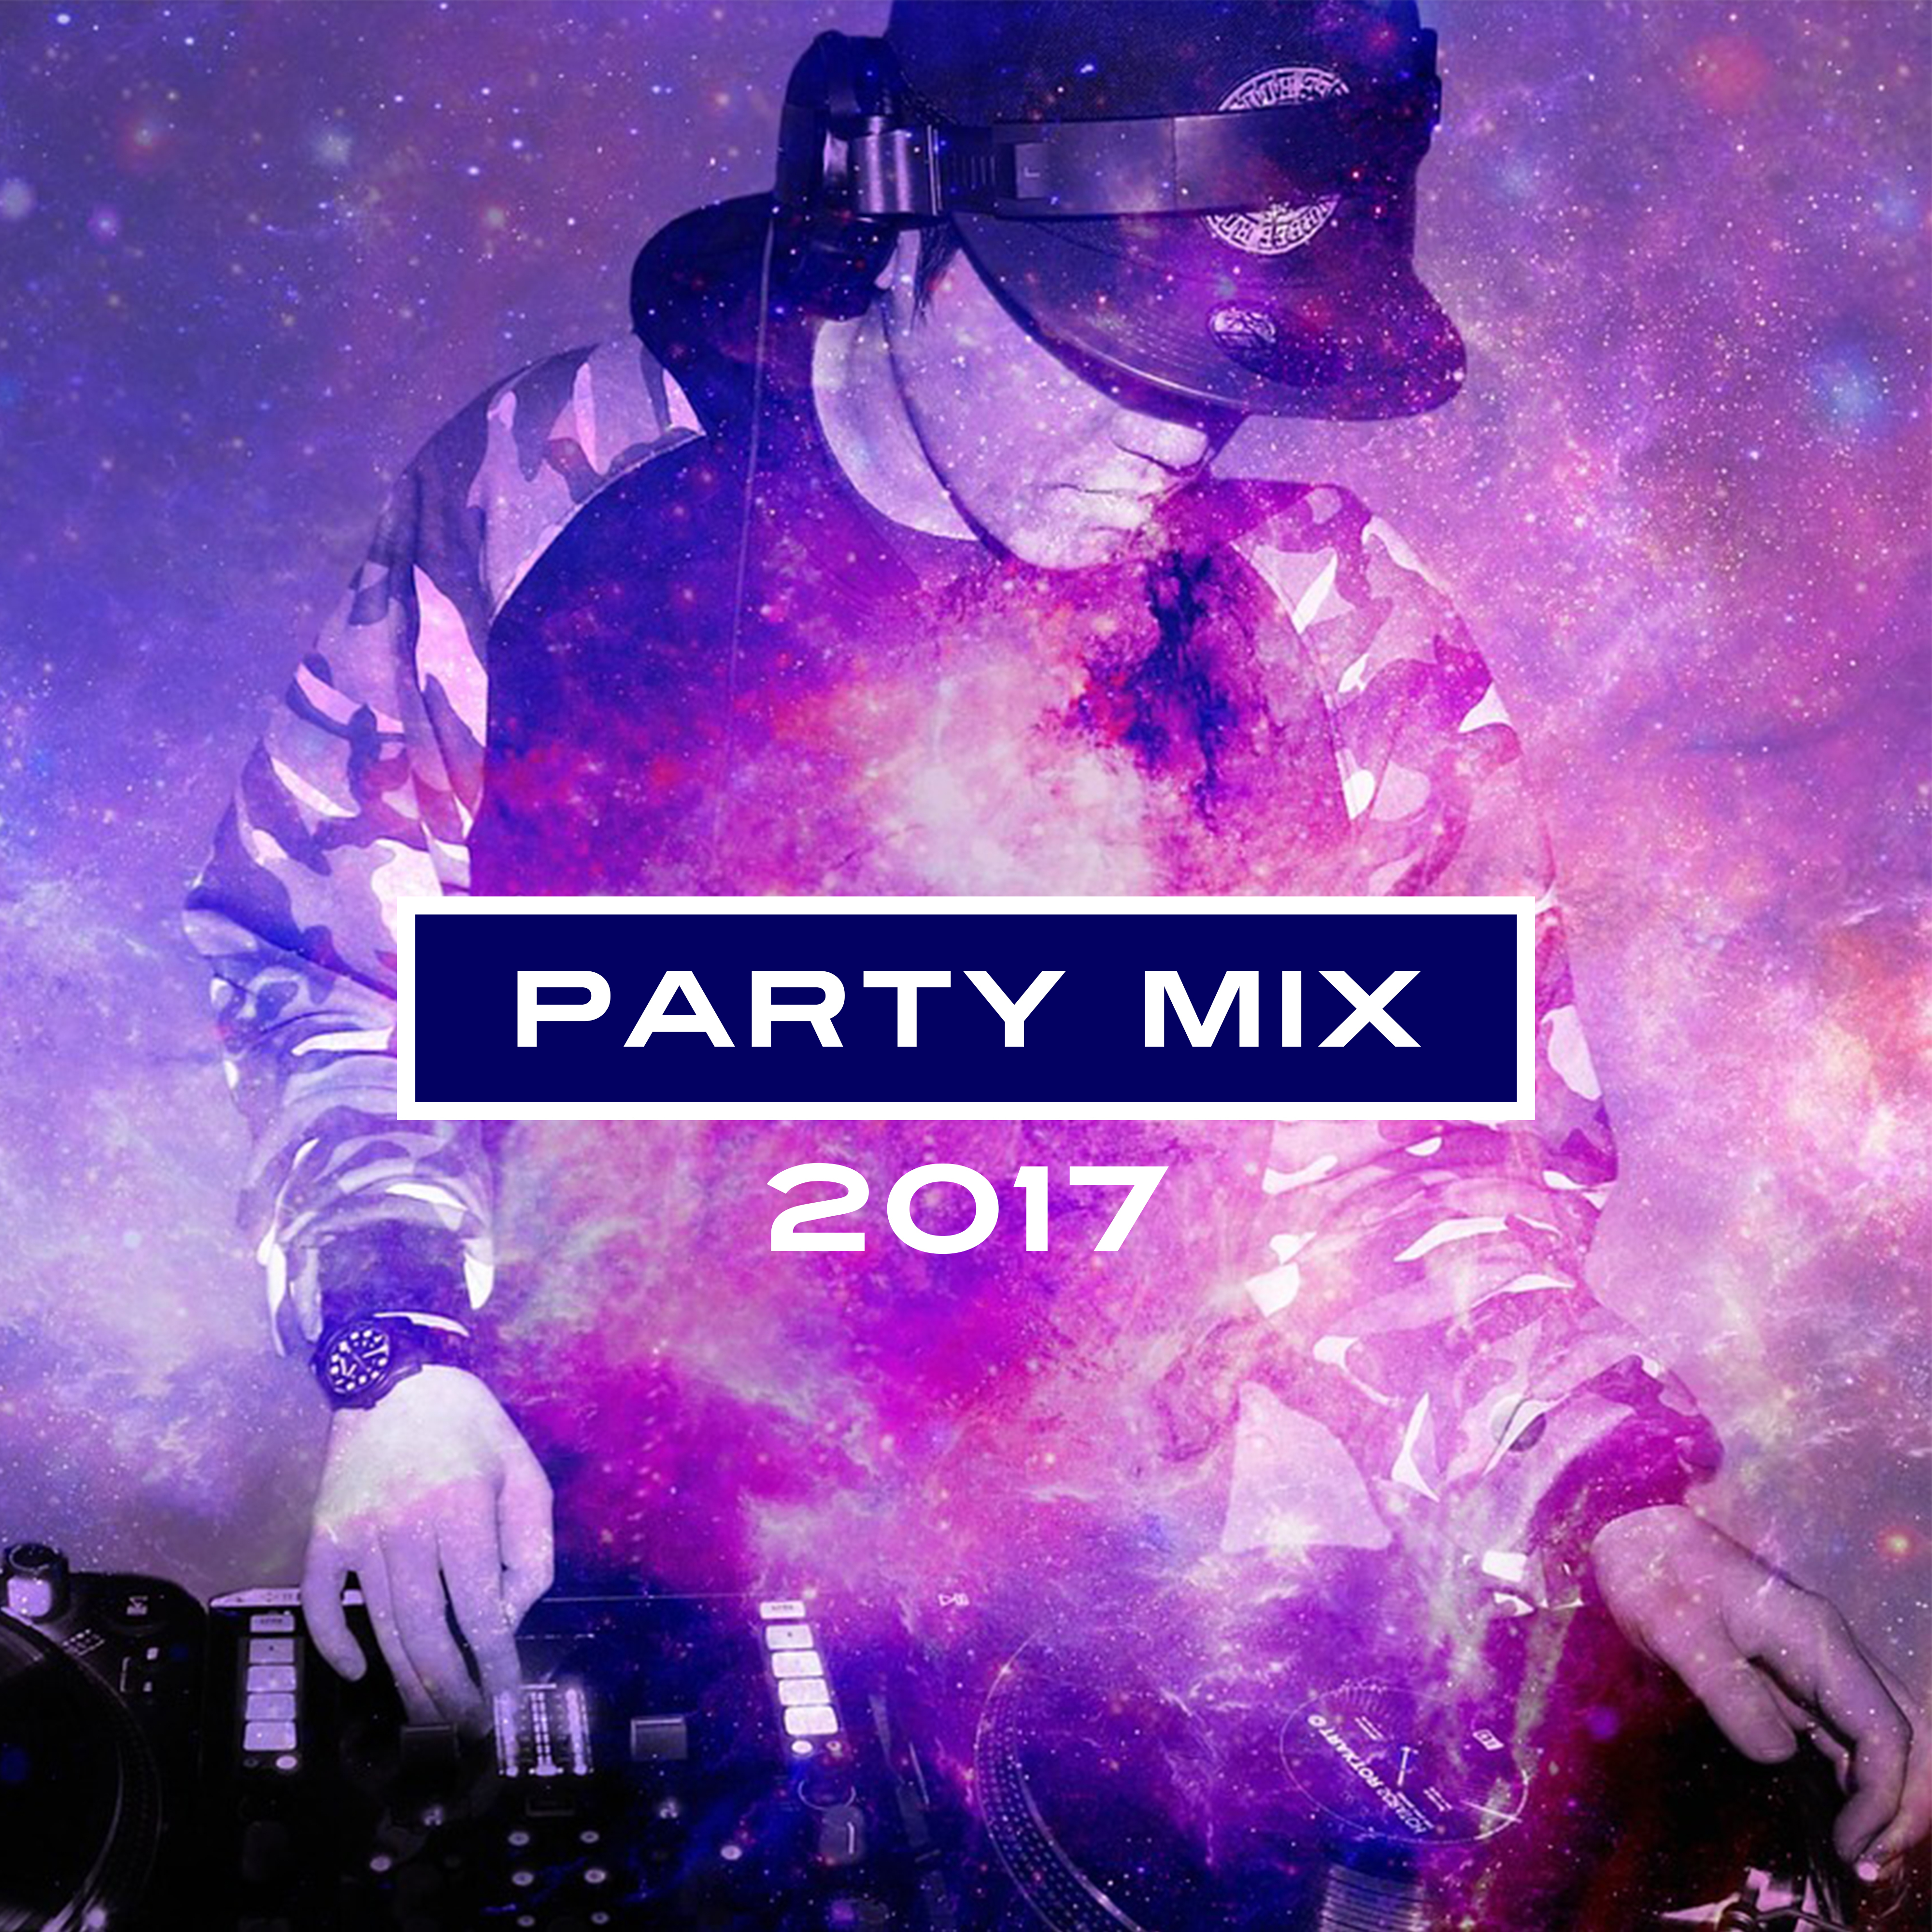 Party Mix 2017 – Holiday Chill Out Music, Relax, Beach Party, Ibiza Lounge, Deep Sun, Summer Chill, Party Night